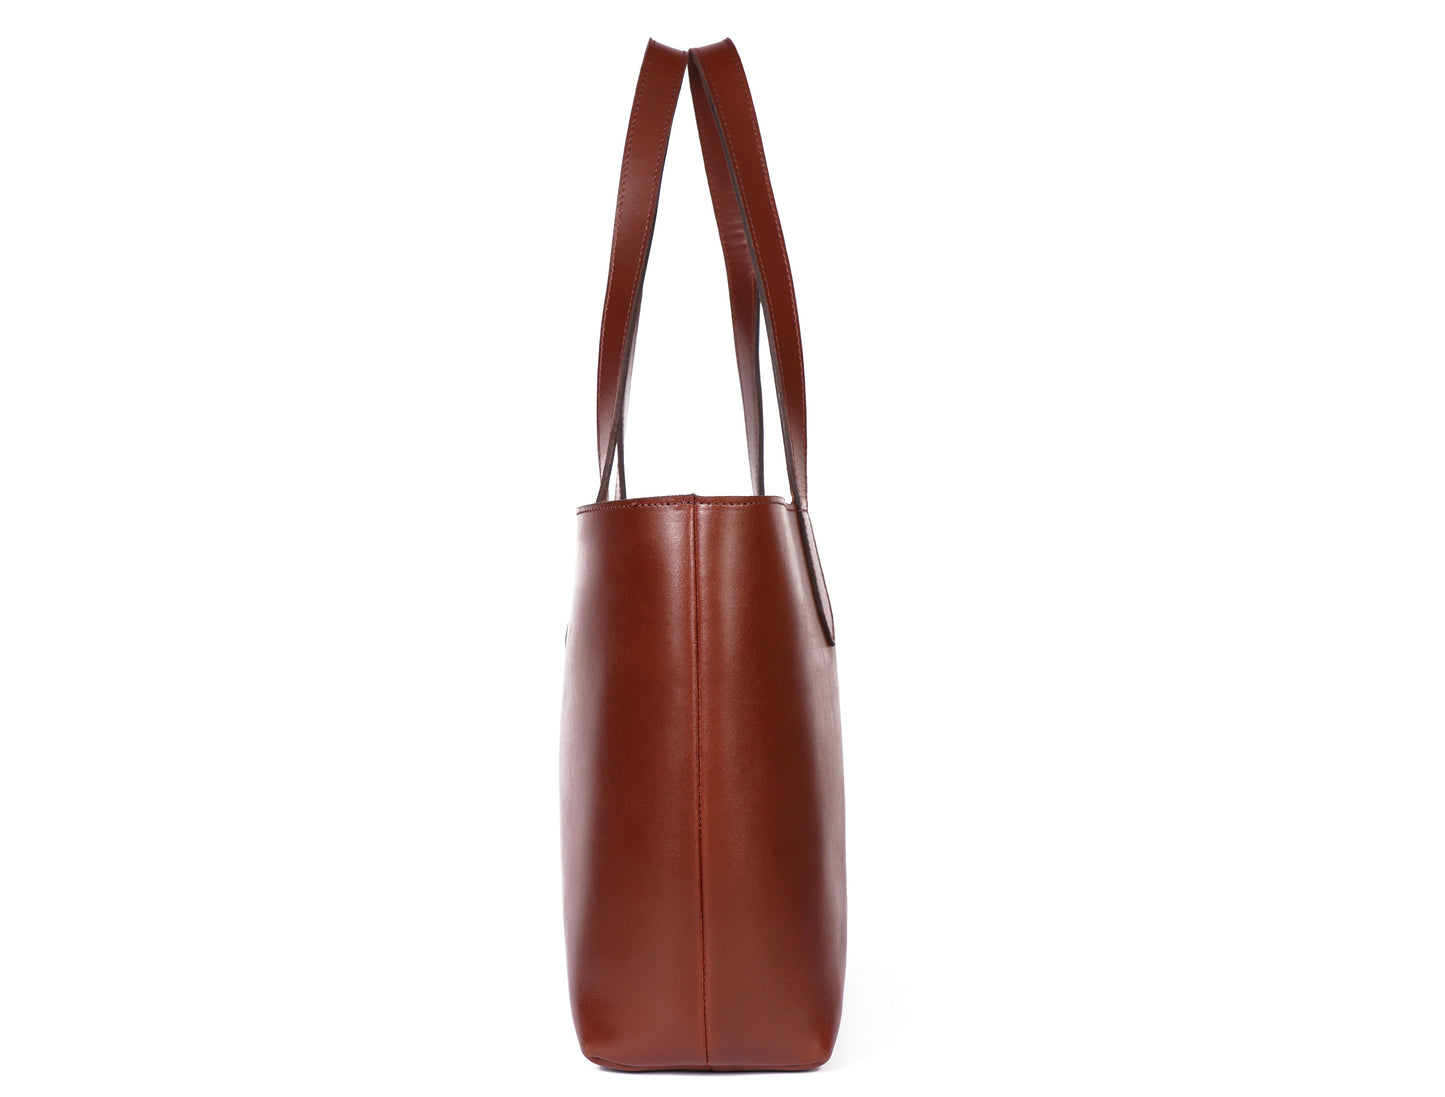 Classic Brown Leather Tote Bag - Elegance Meets Functionality. - CELTICINDIA